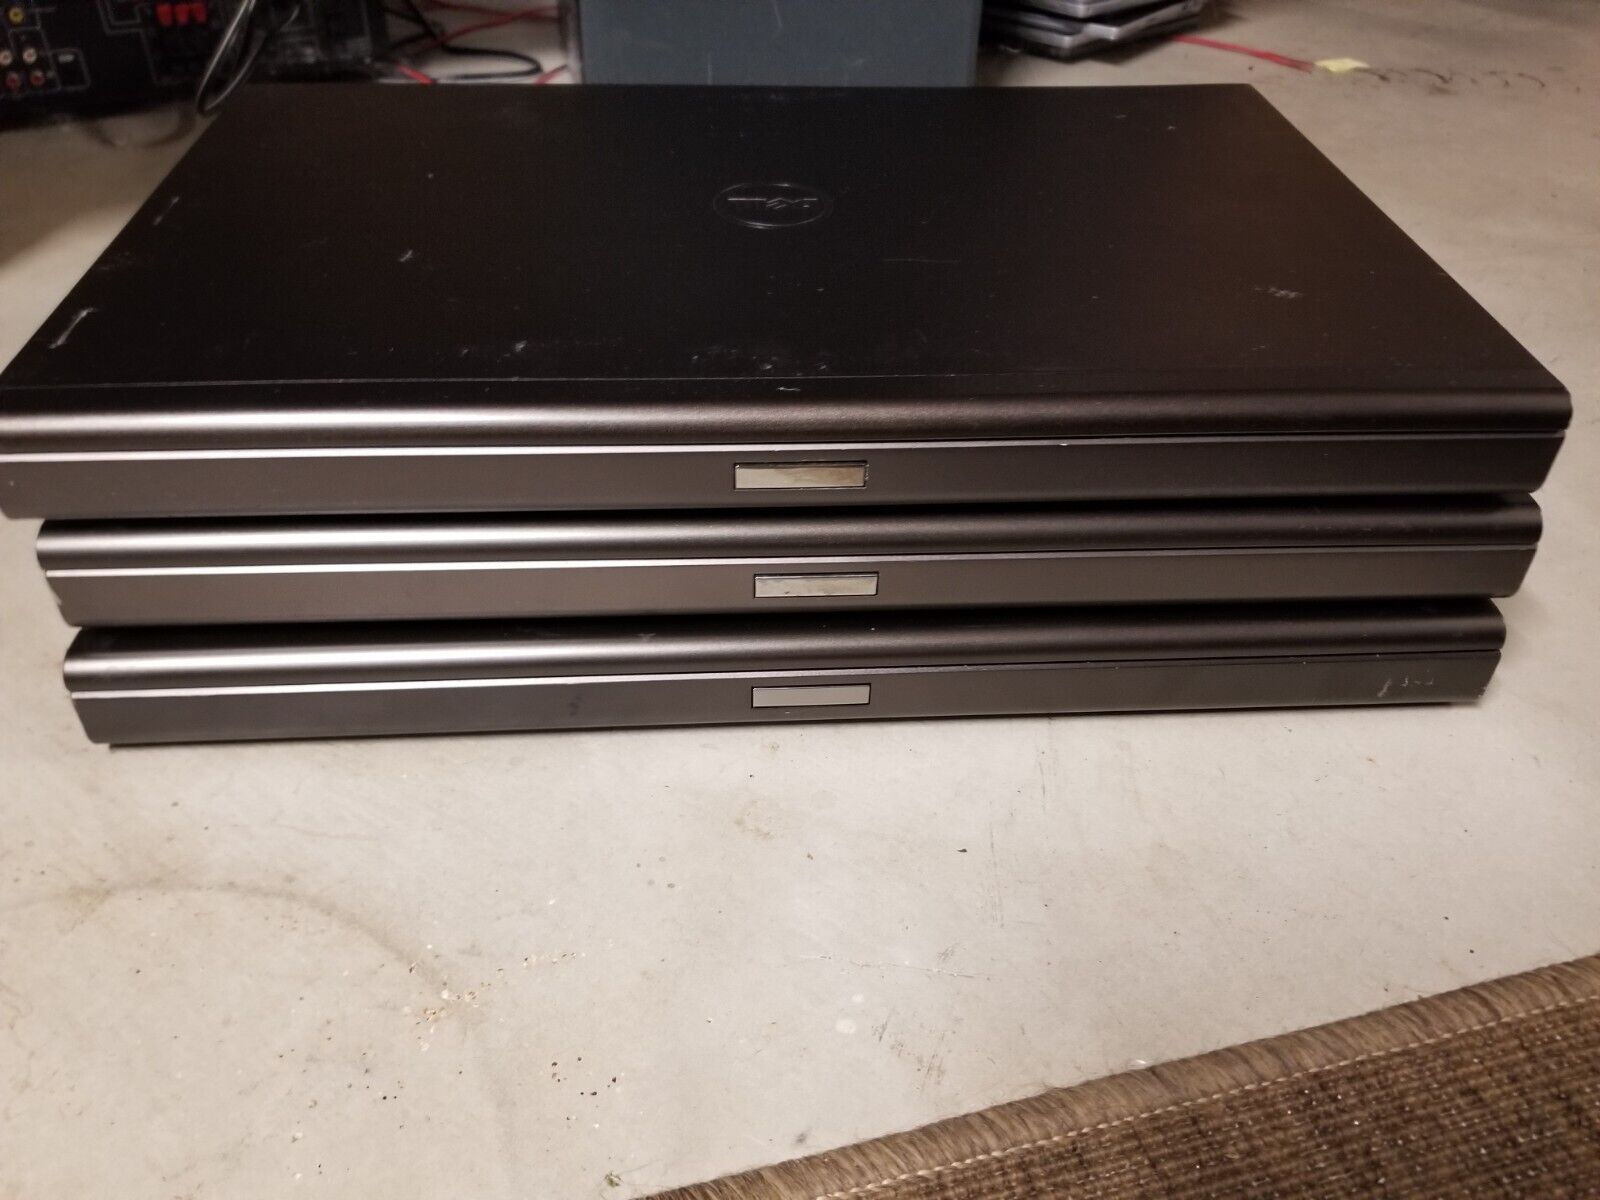 Lot of 3--Dell Precision M6700 i7-3rd Gen--NO HDD or OS, For Parts